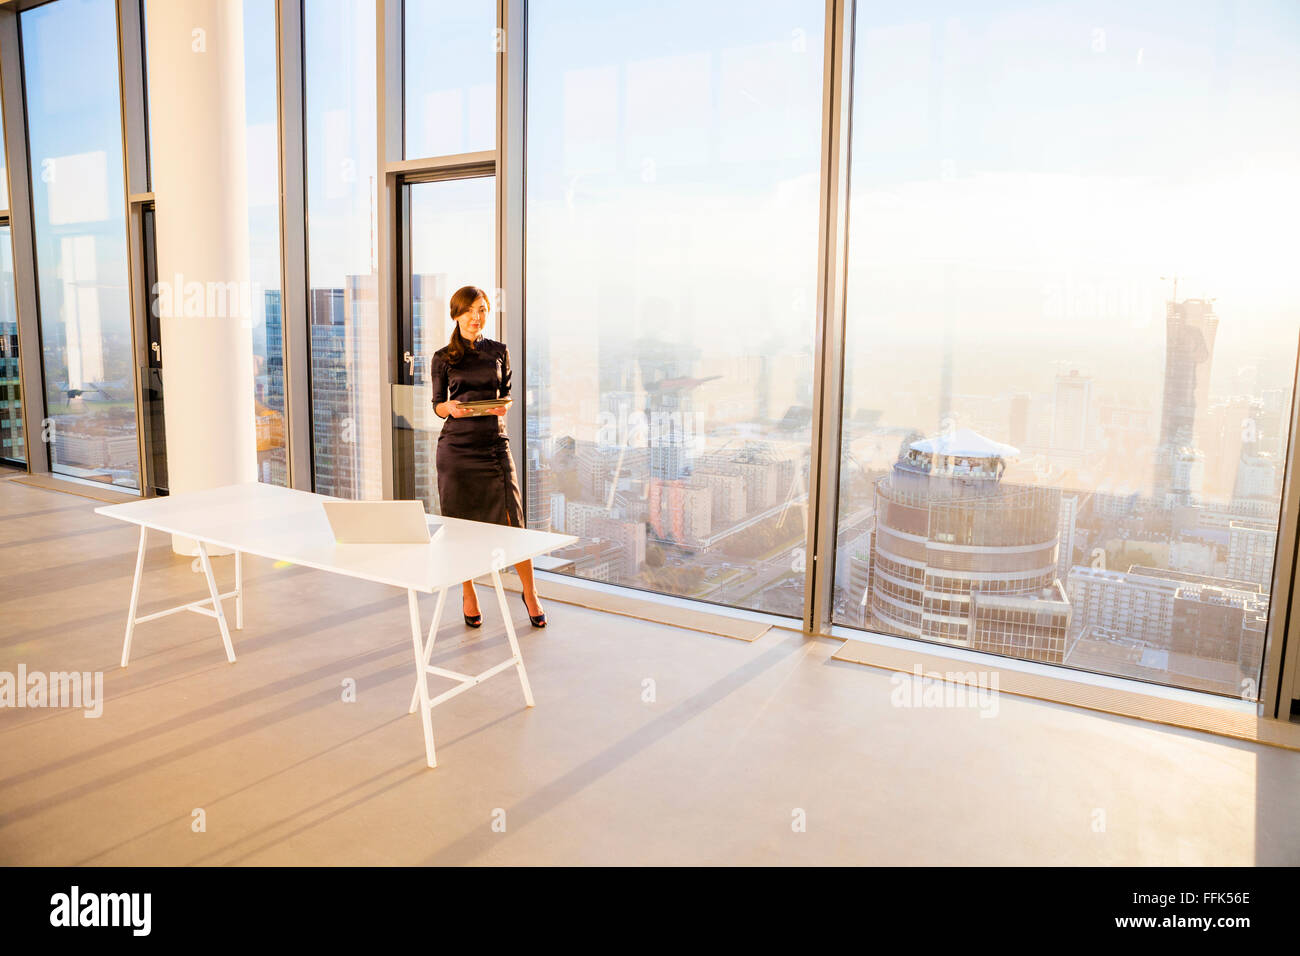 Female architect in office with urban skyline in background Stock Photo